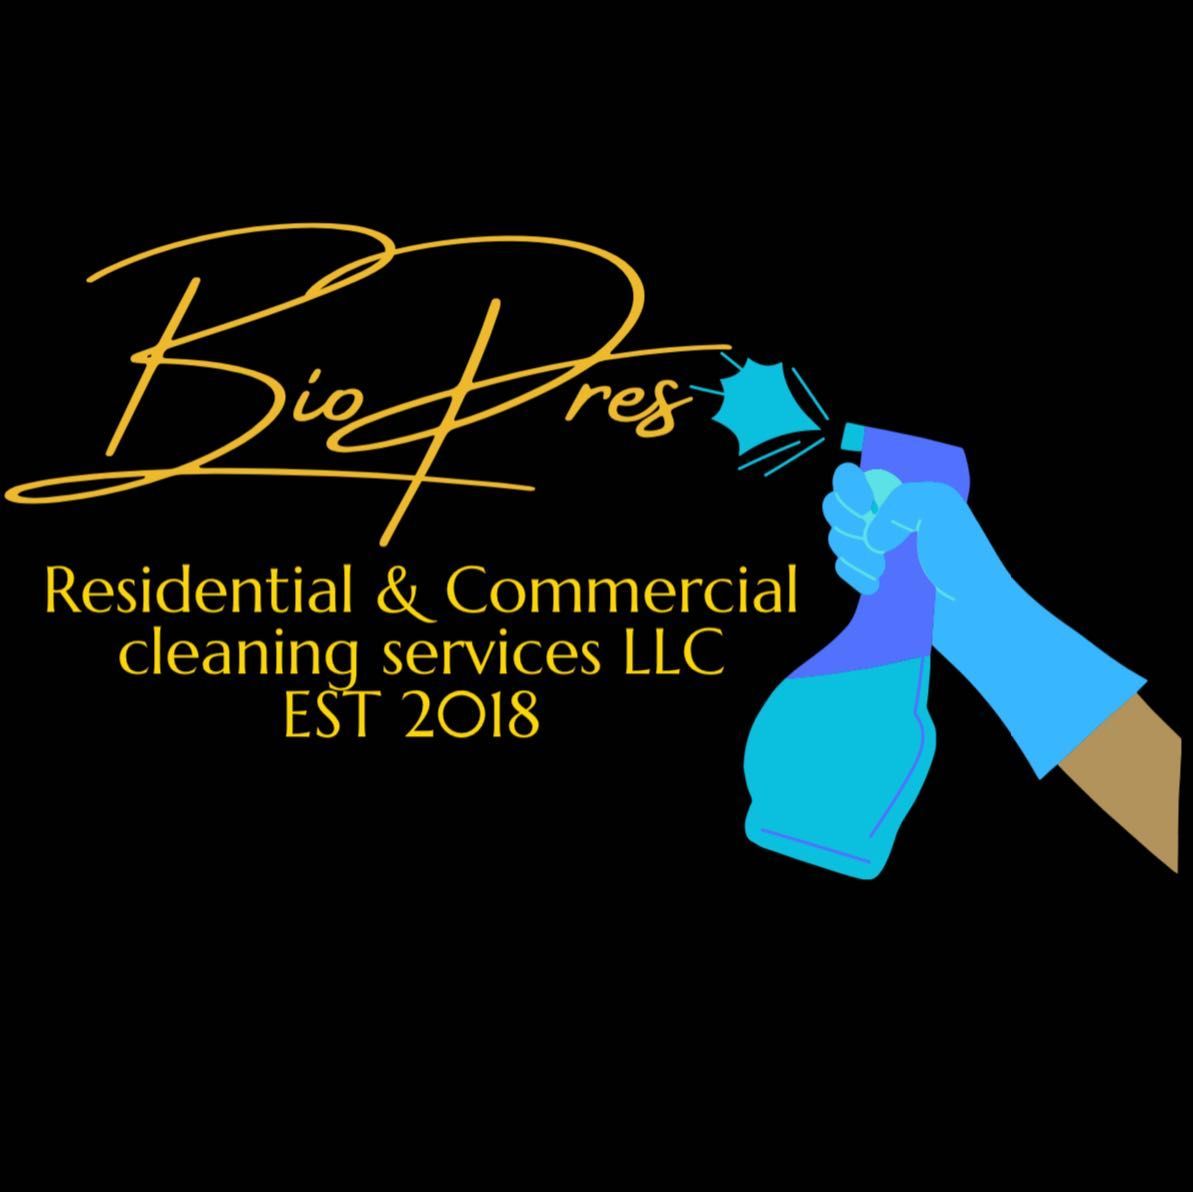 Biopres Residential & Commercial Cleaning services LLC, Kentwood, 49508